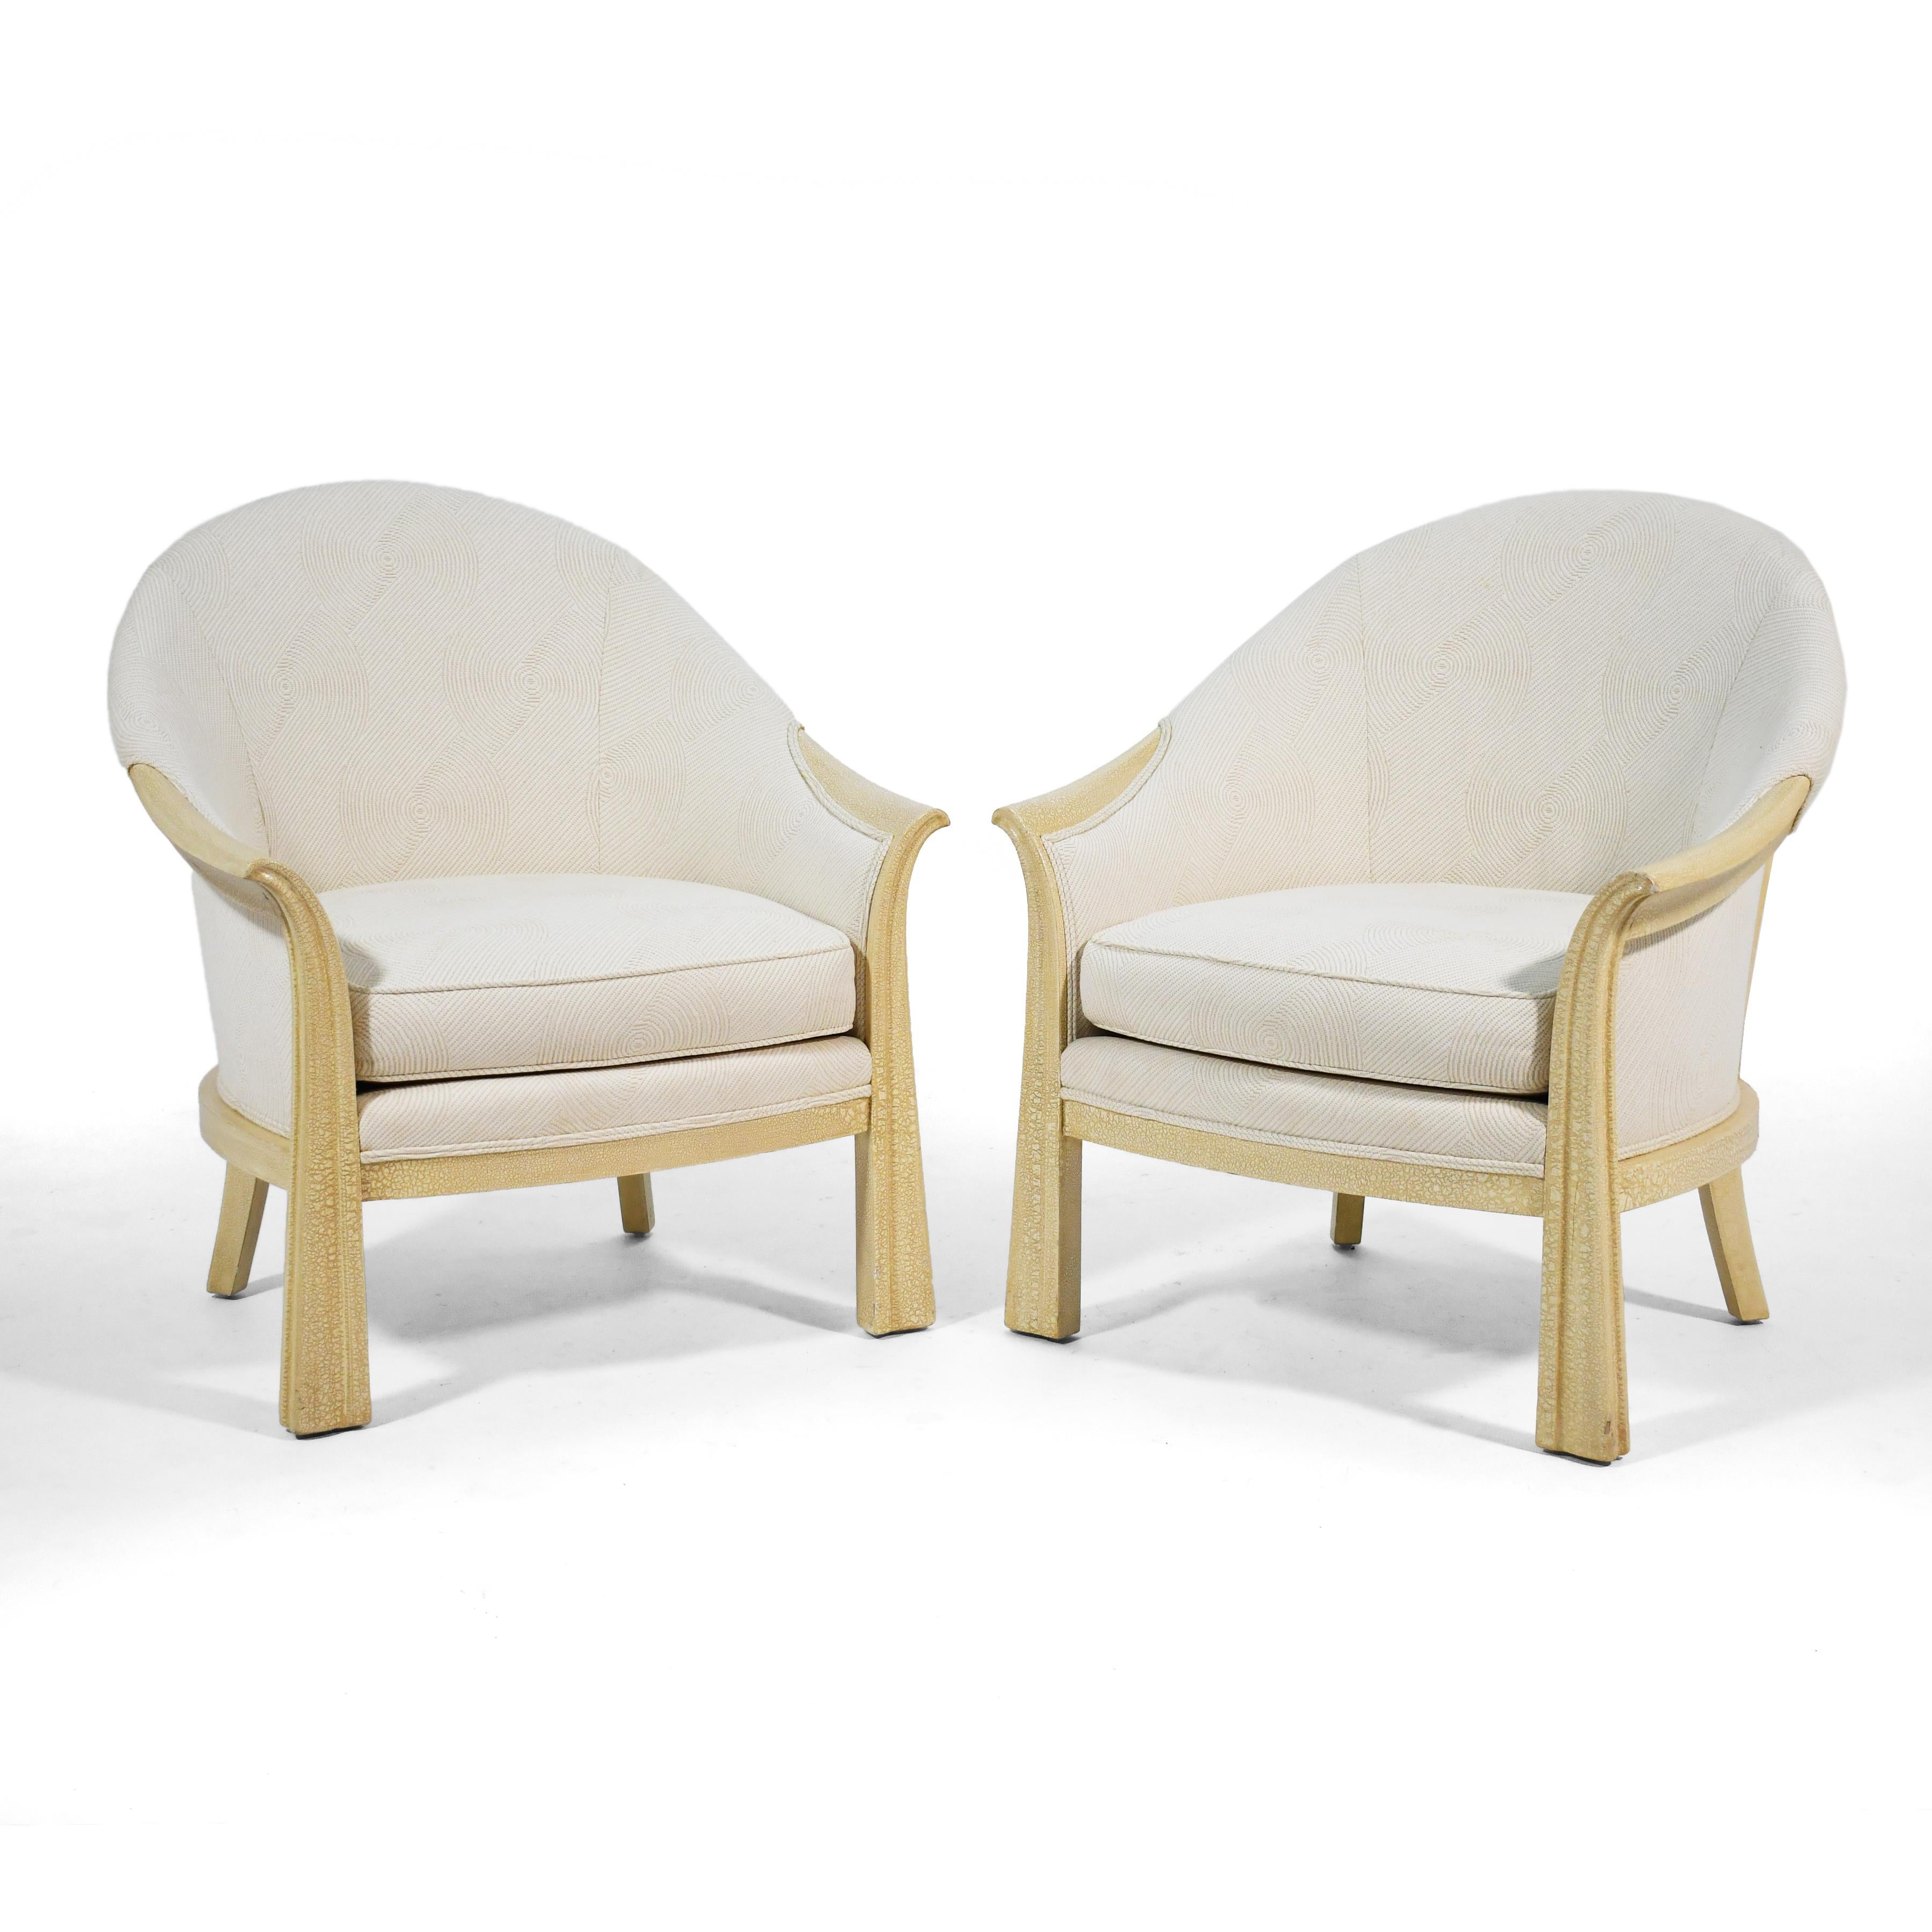 Early 20th Century Pair of Lounge Chairs in the Manner of Pierre Chareau For Sale